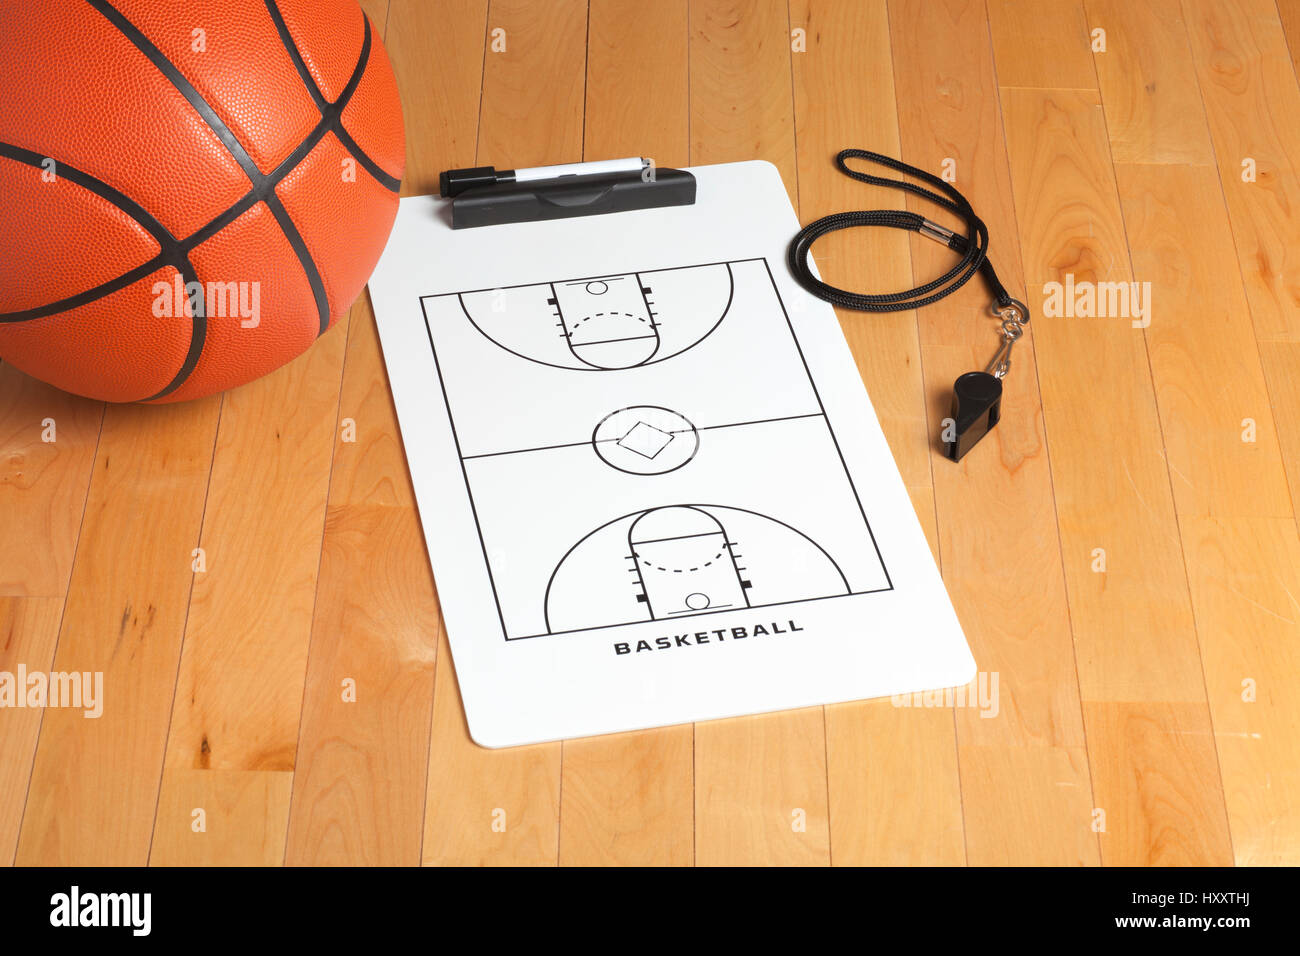 A basketball with coach's clipboard and whistle on a wooden gymnasium floor Stock Photo